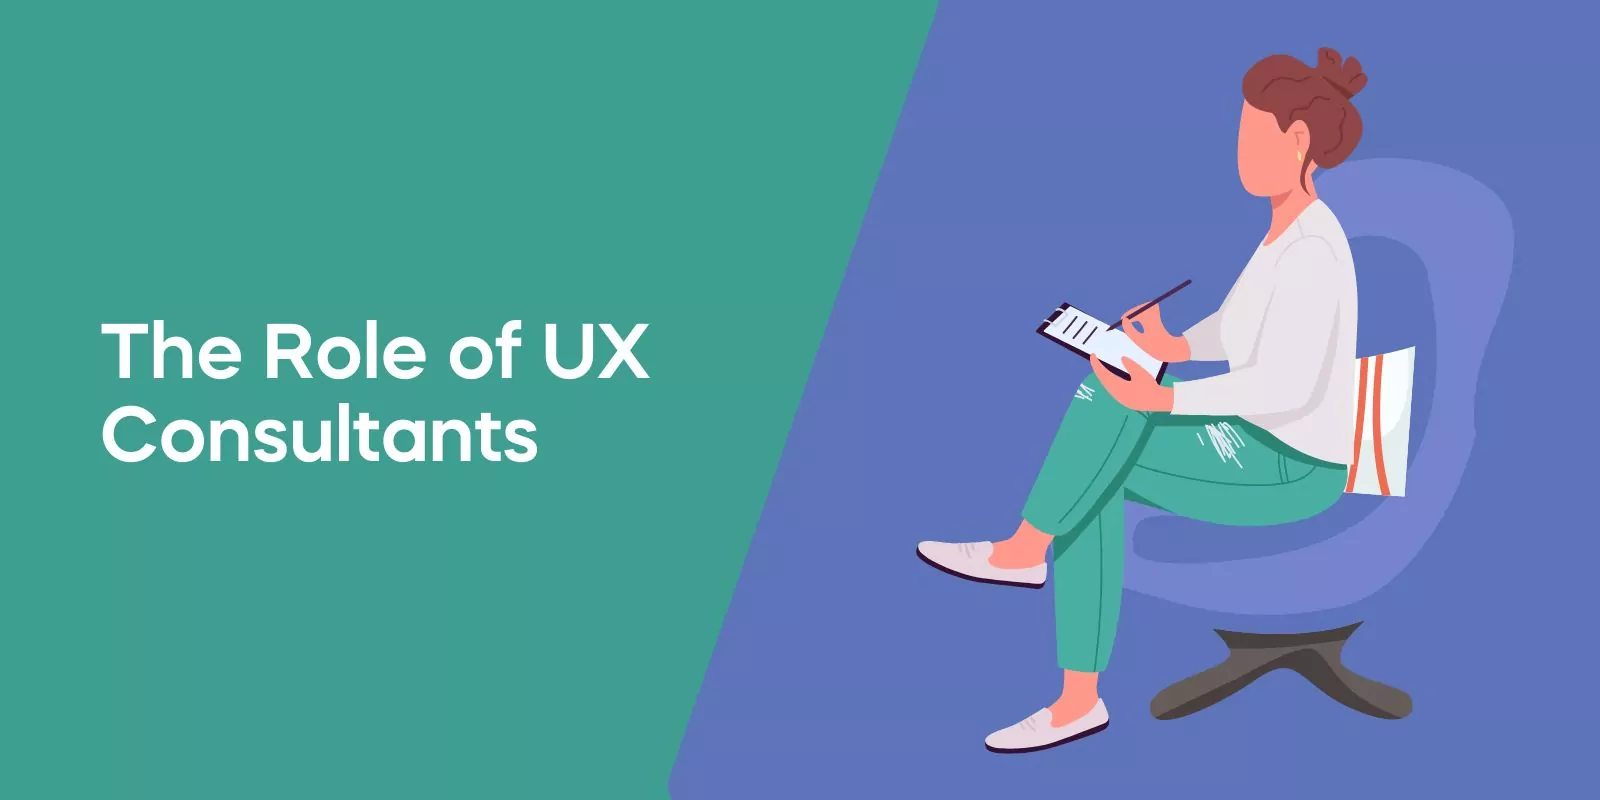 The Role of UX Consultants